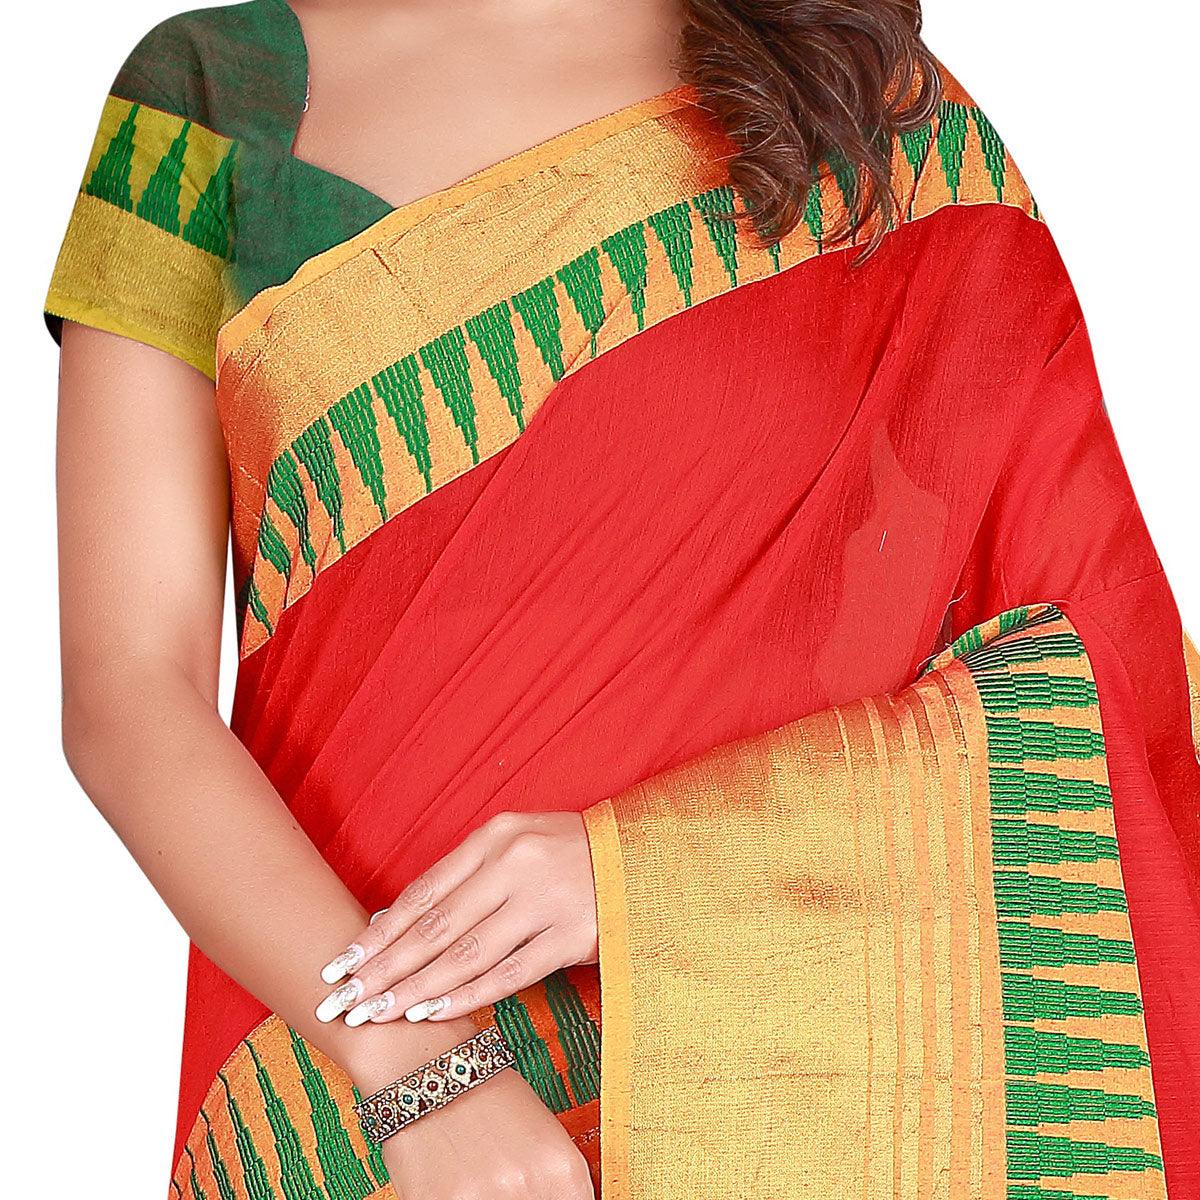 Energetic Red Colored Casual Wear Printed Cotton Handloom Saree - Peachmode